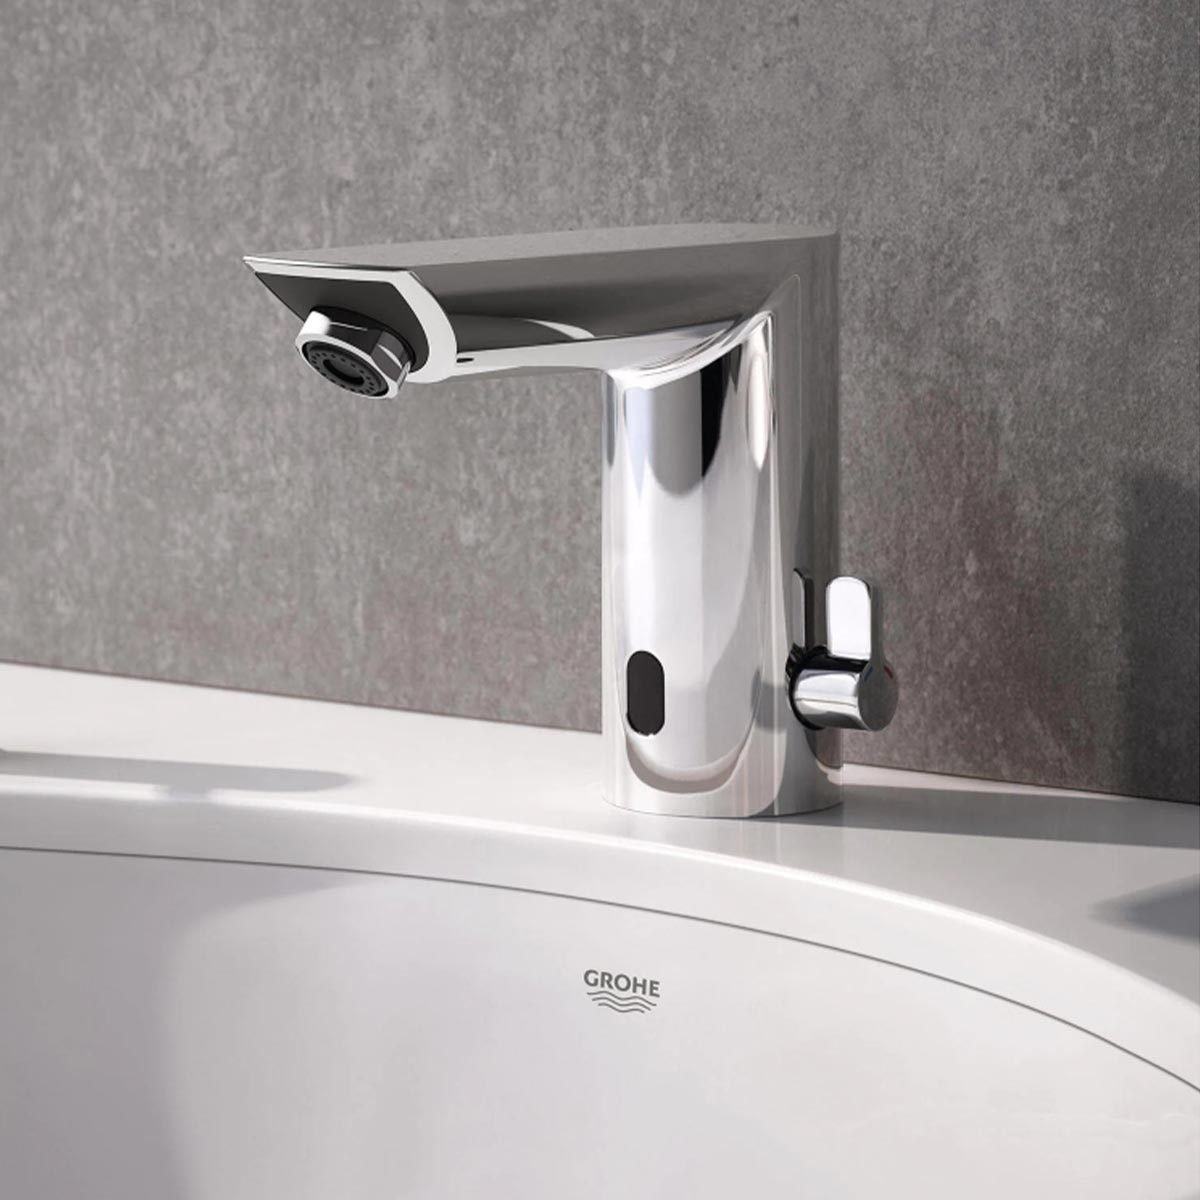 Buyers Guide To Touchless Bathroom Faucets ?resize=300%2C300